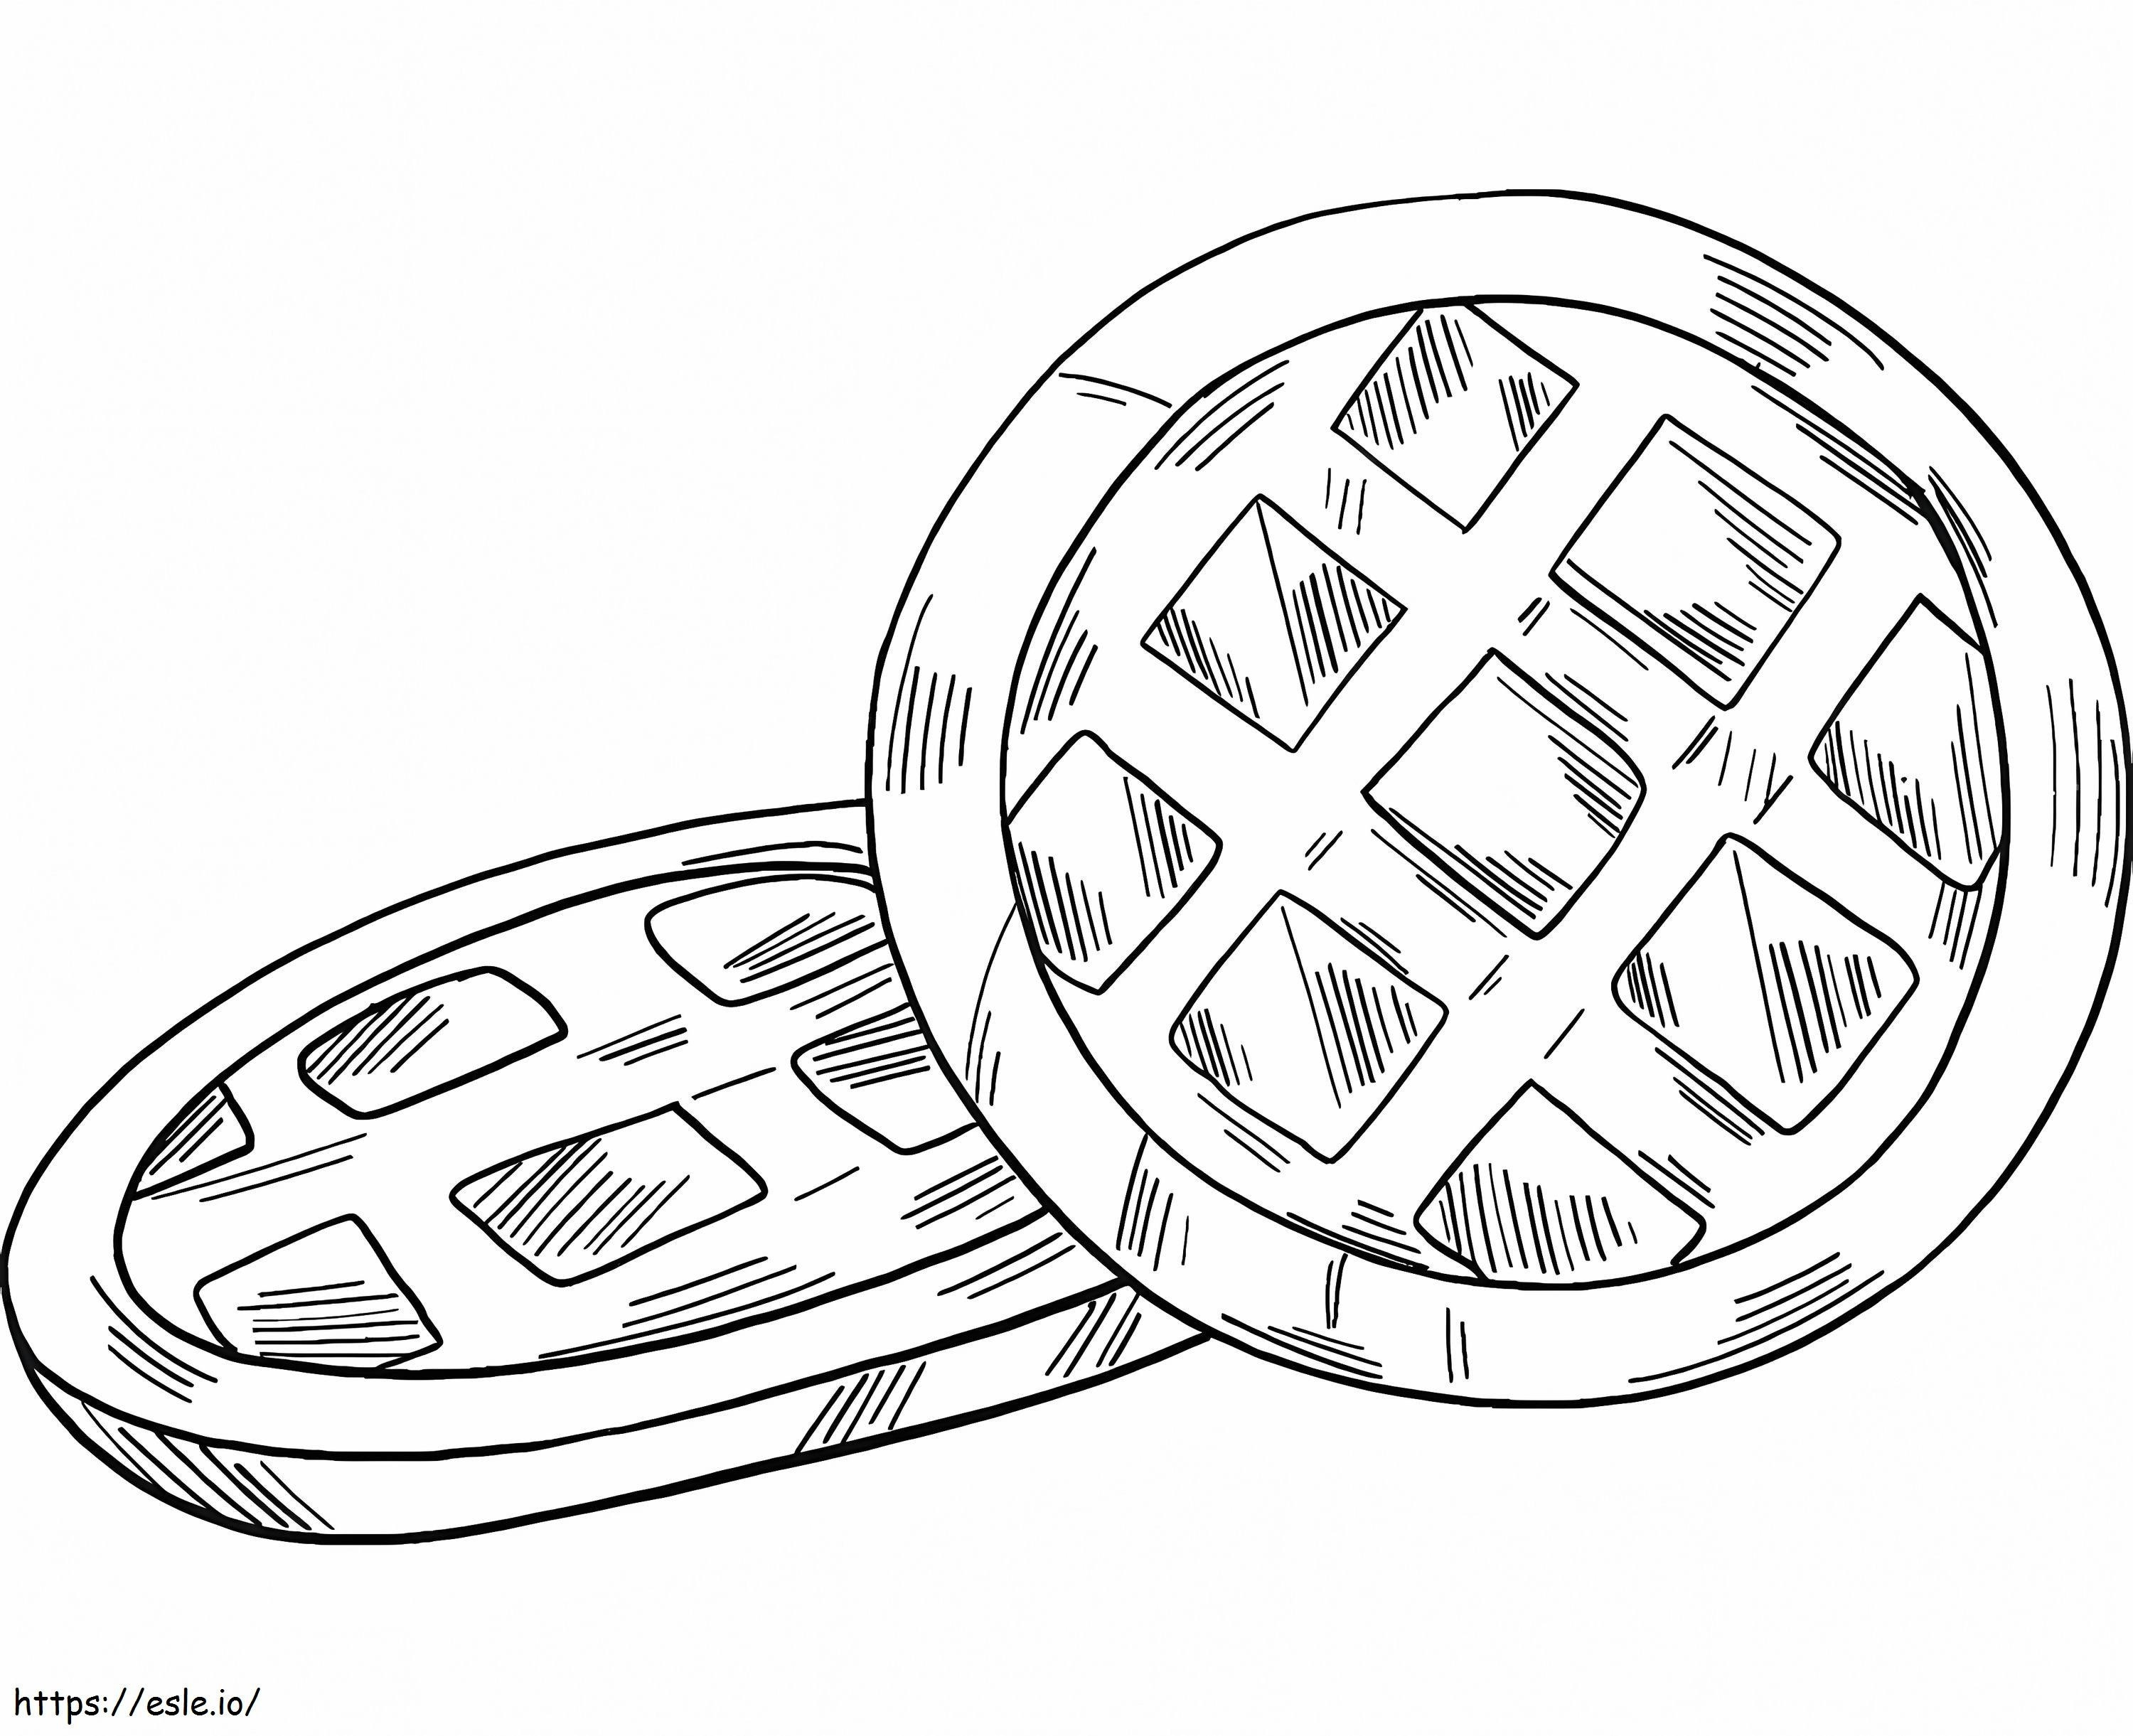 Two Cookies coloring page